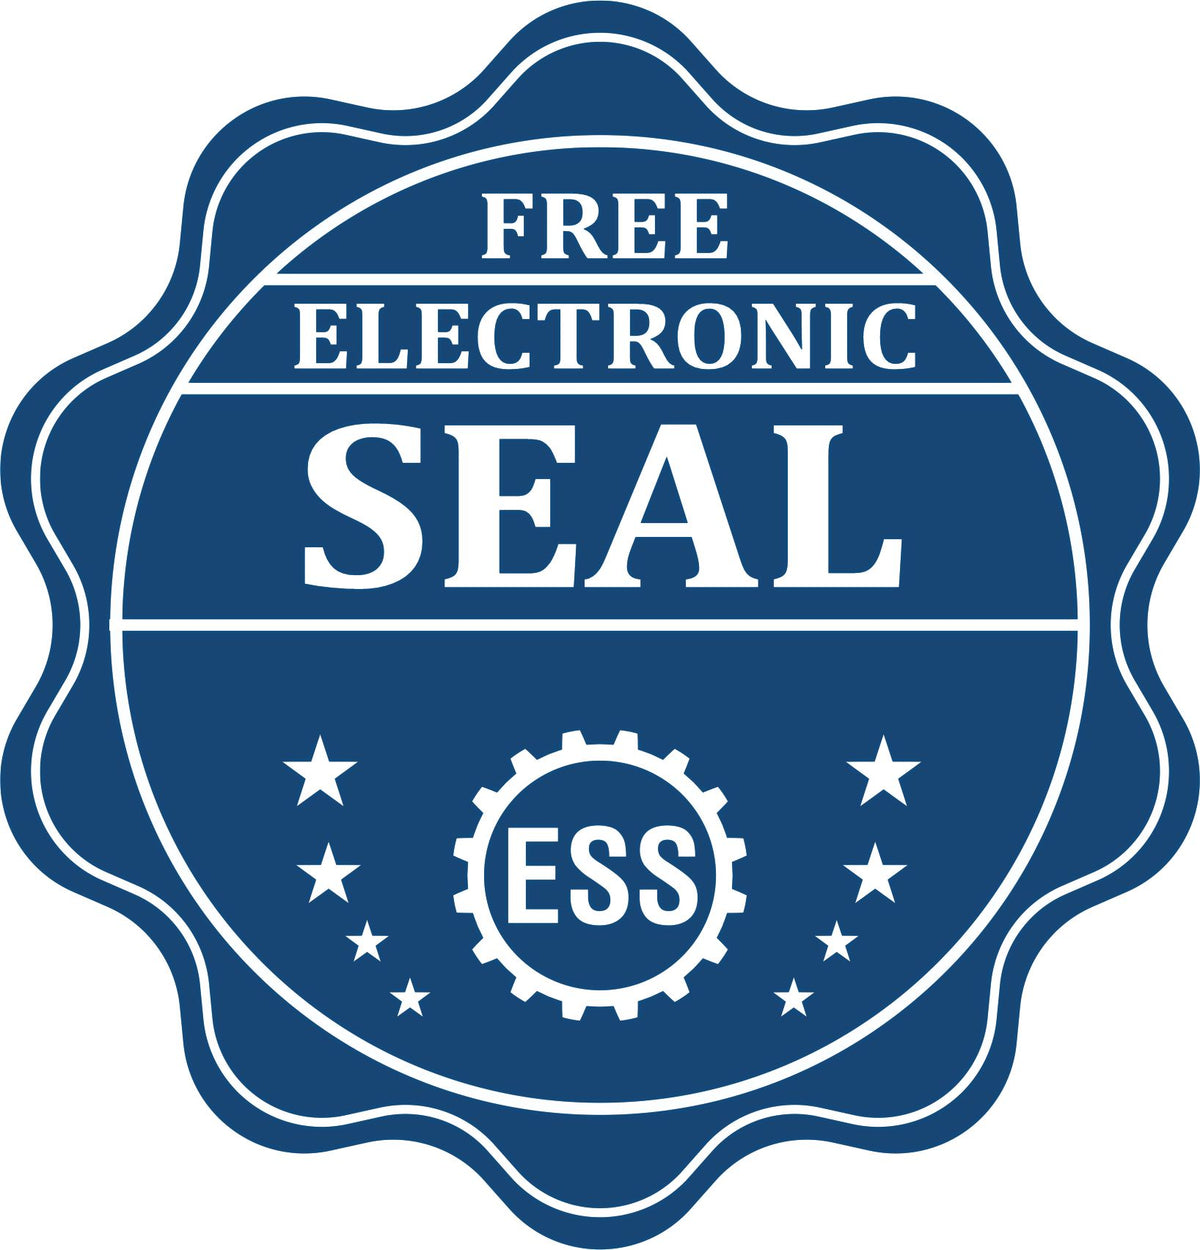 A badge showing a free electronic seal for the Slim Pre-Inked Kentucky Professional Geologist Seal Stamp with stars and the ESS gear on the emblem.